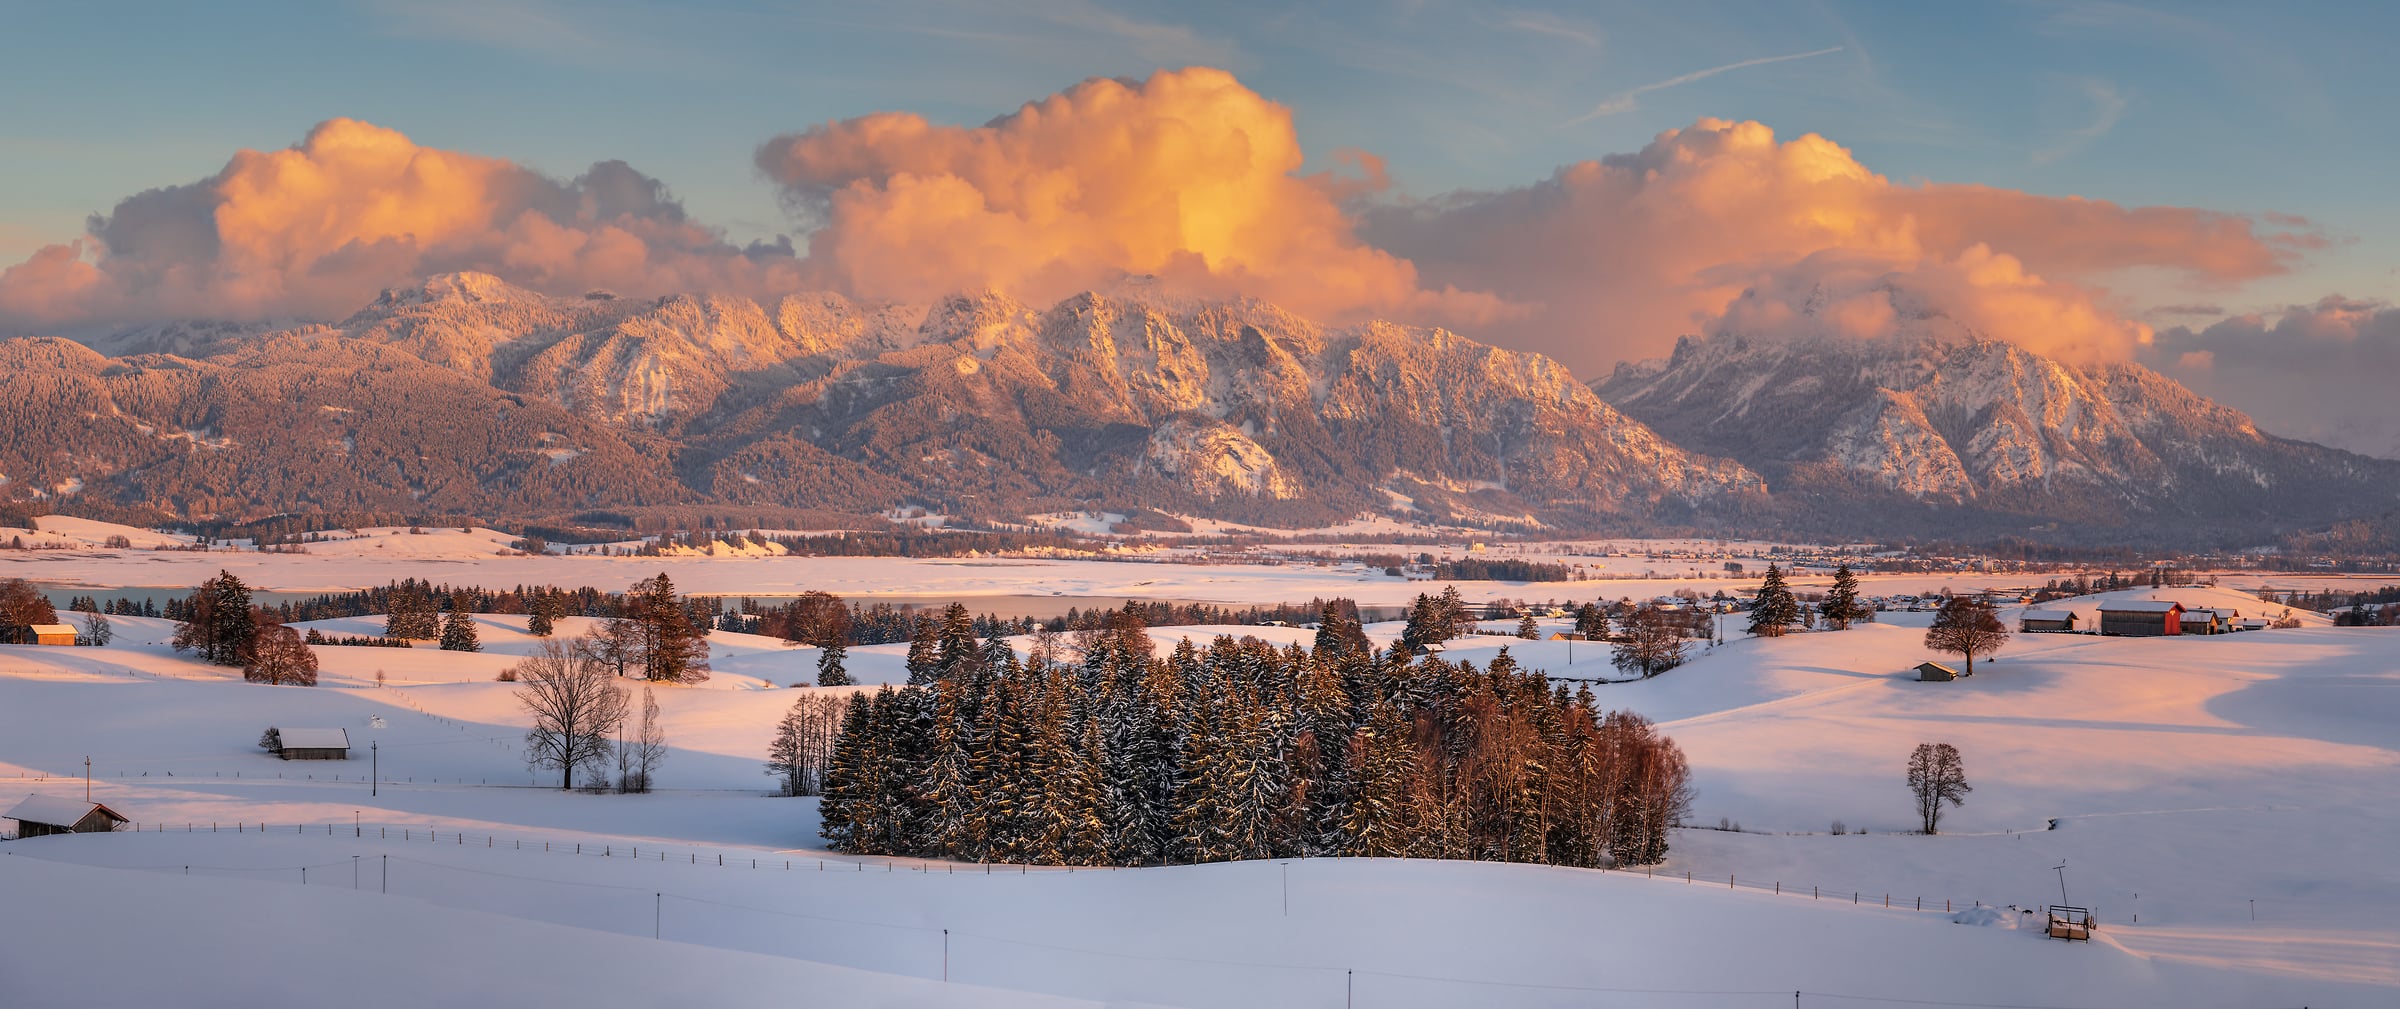 797 megapixels! A very high resolution, large-format VAST photo print of scenic winter landscape with mountains and snowy farm fields at sunset; photograph created by Alfred Feil in Füssen, Bavaria, Germany.